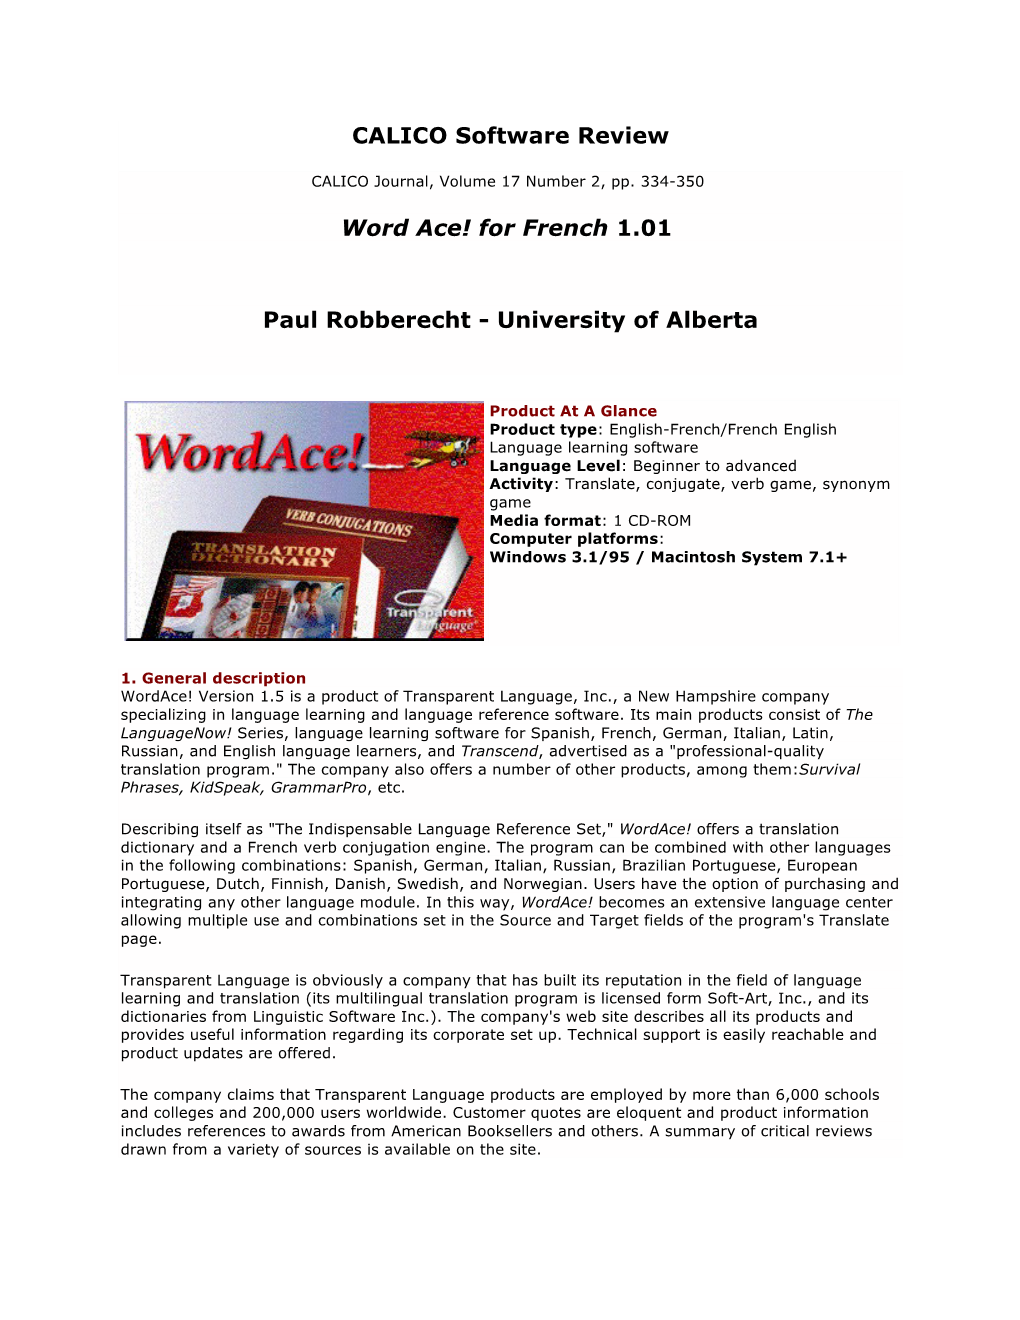 CALICO Software Review Word Ace! for French 1.01 Paul Robberecht